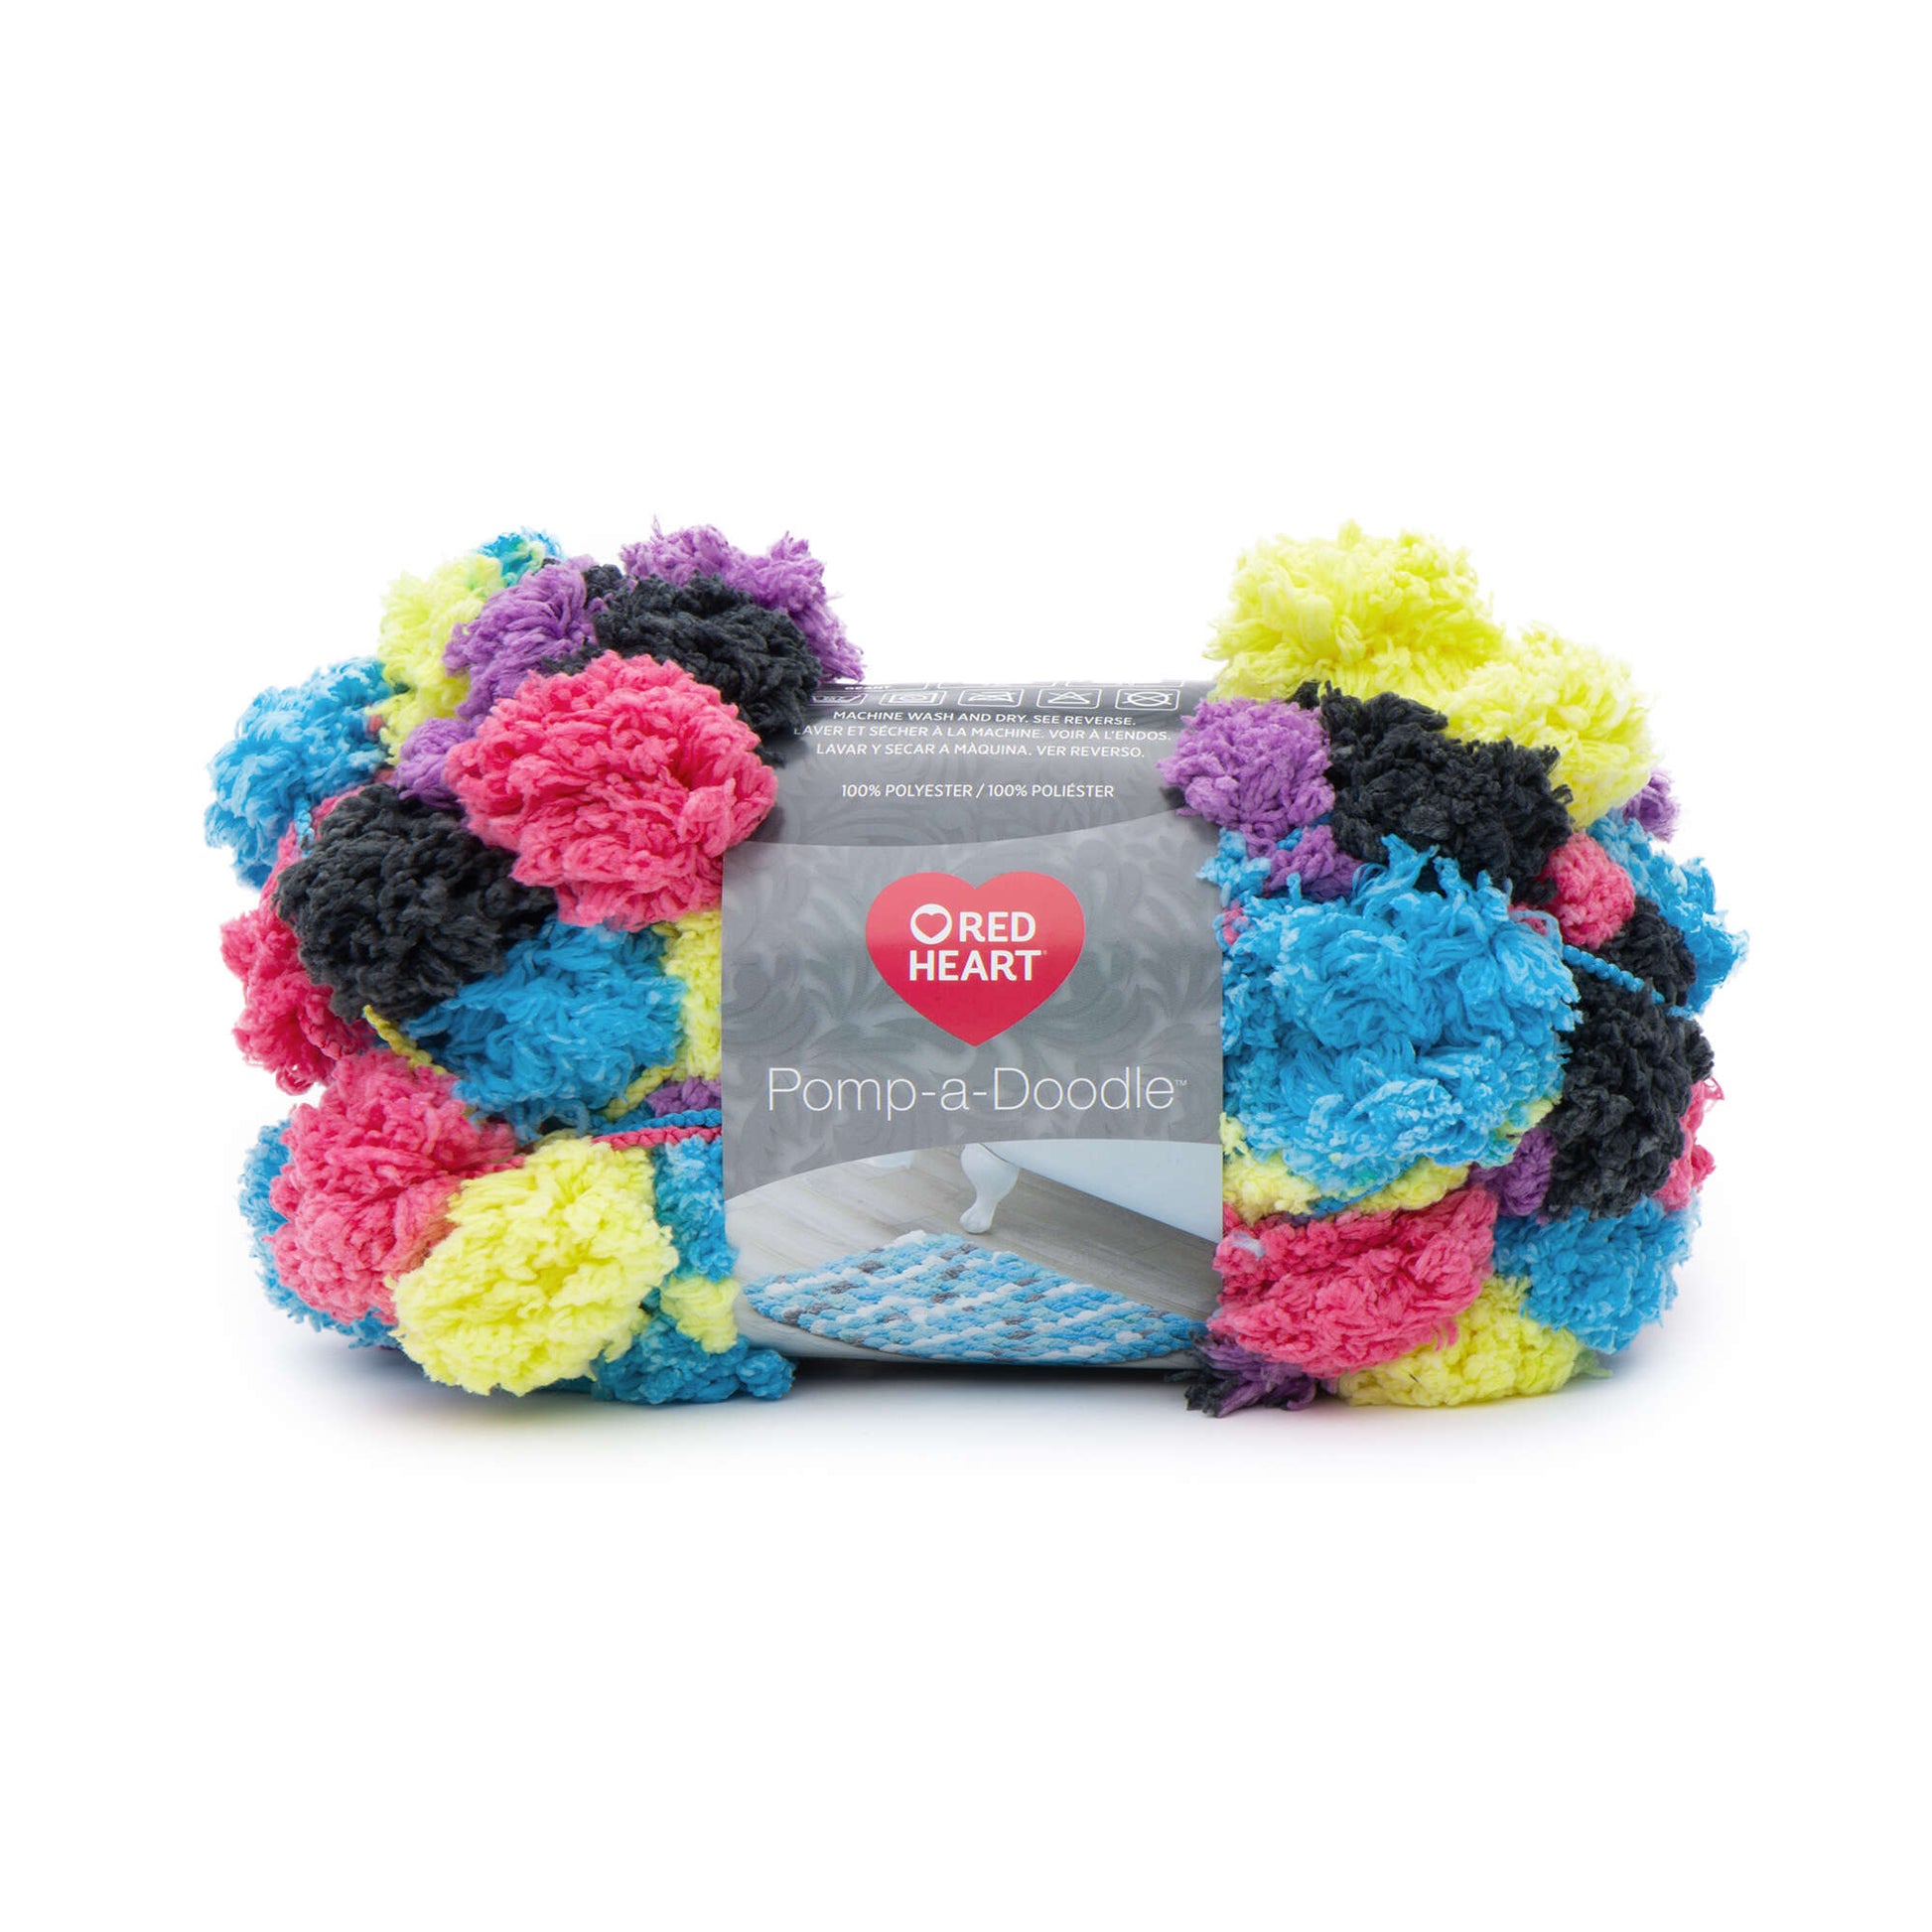 Red Heart Pomp-a-Doodle Yarn - Clearance shades